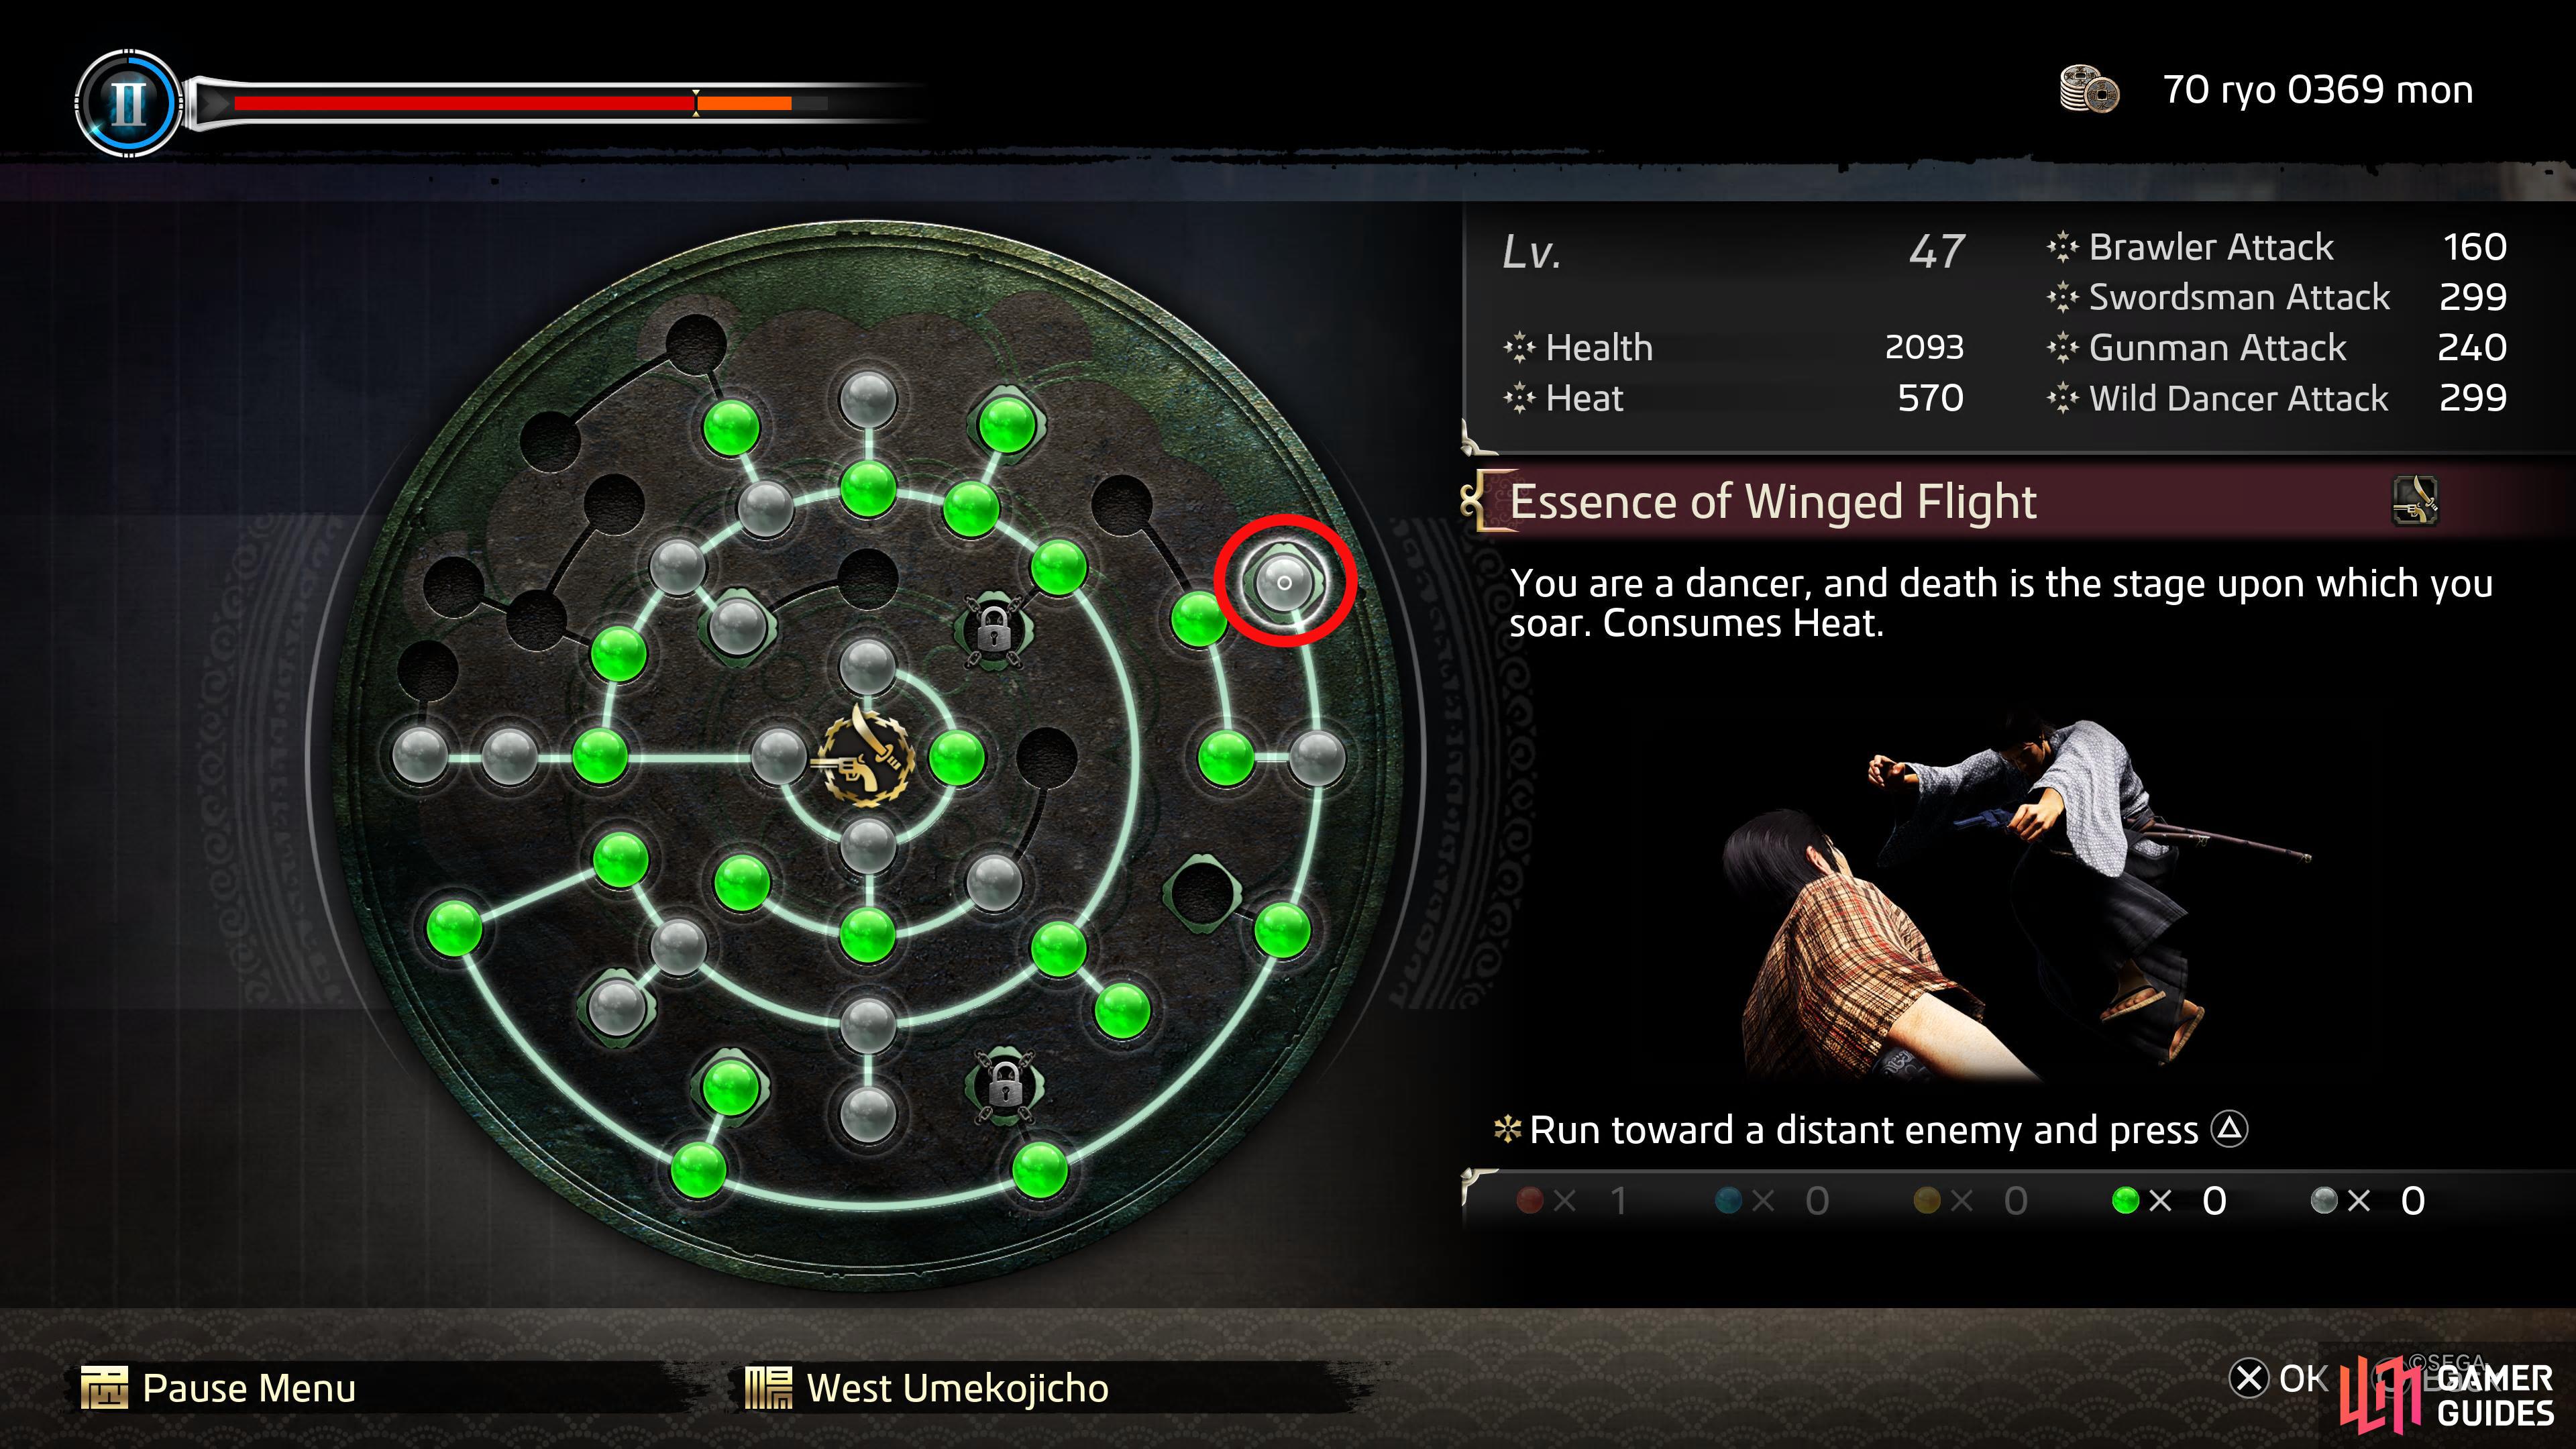 Here’s where Winged Flight appears on the Ability Wheel.